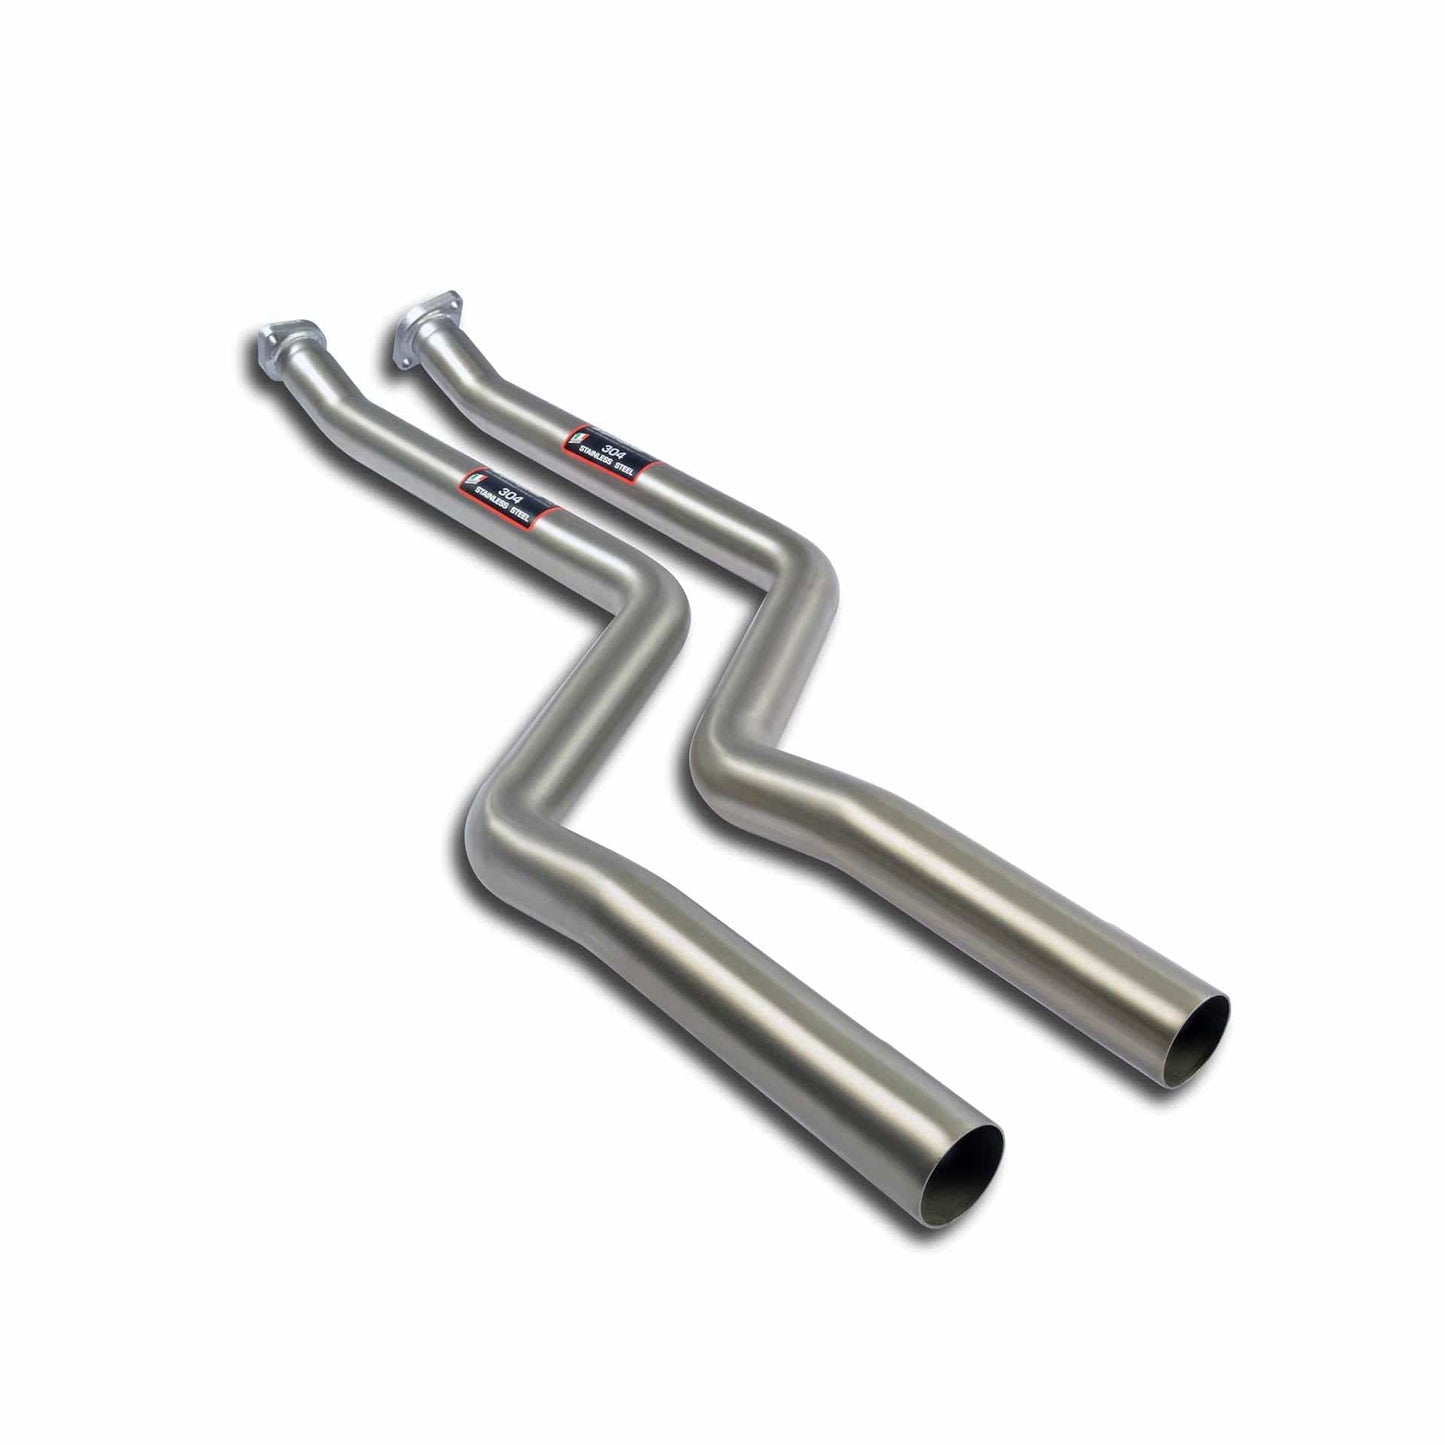 Supersprint BMW E60 E61 E63 E64 Performance Catless Front Section Exhaust Pipes - Left & Right (525i, 530i & 630i)